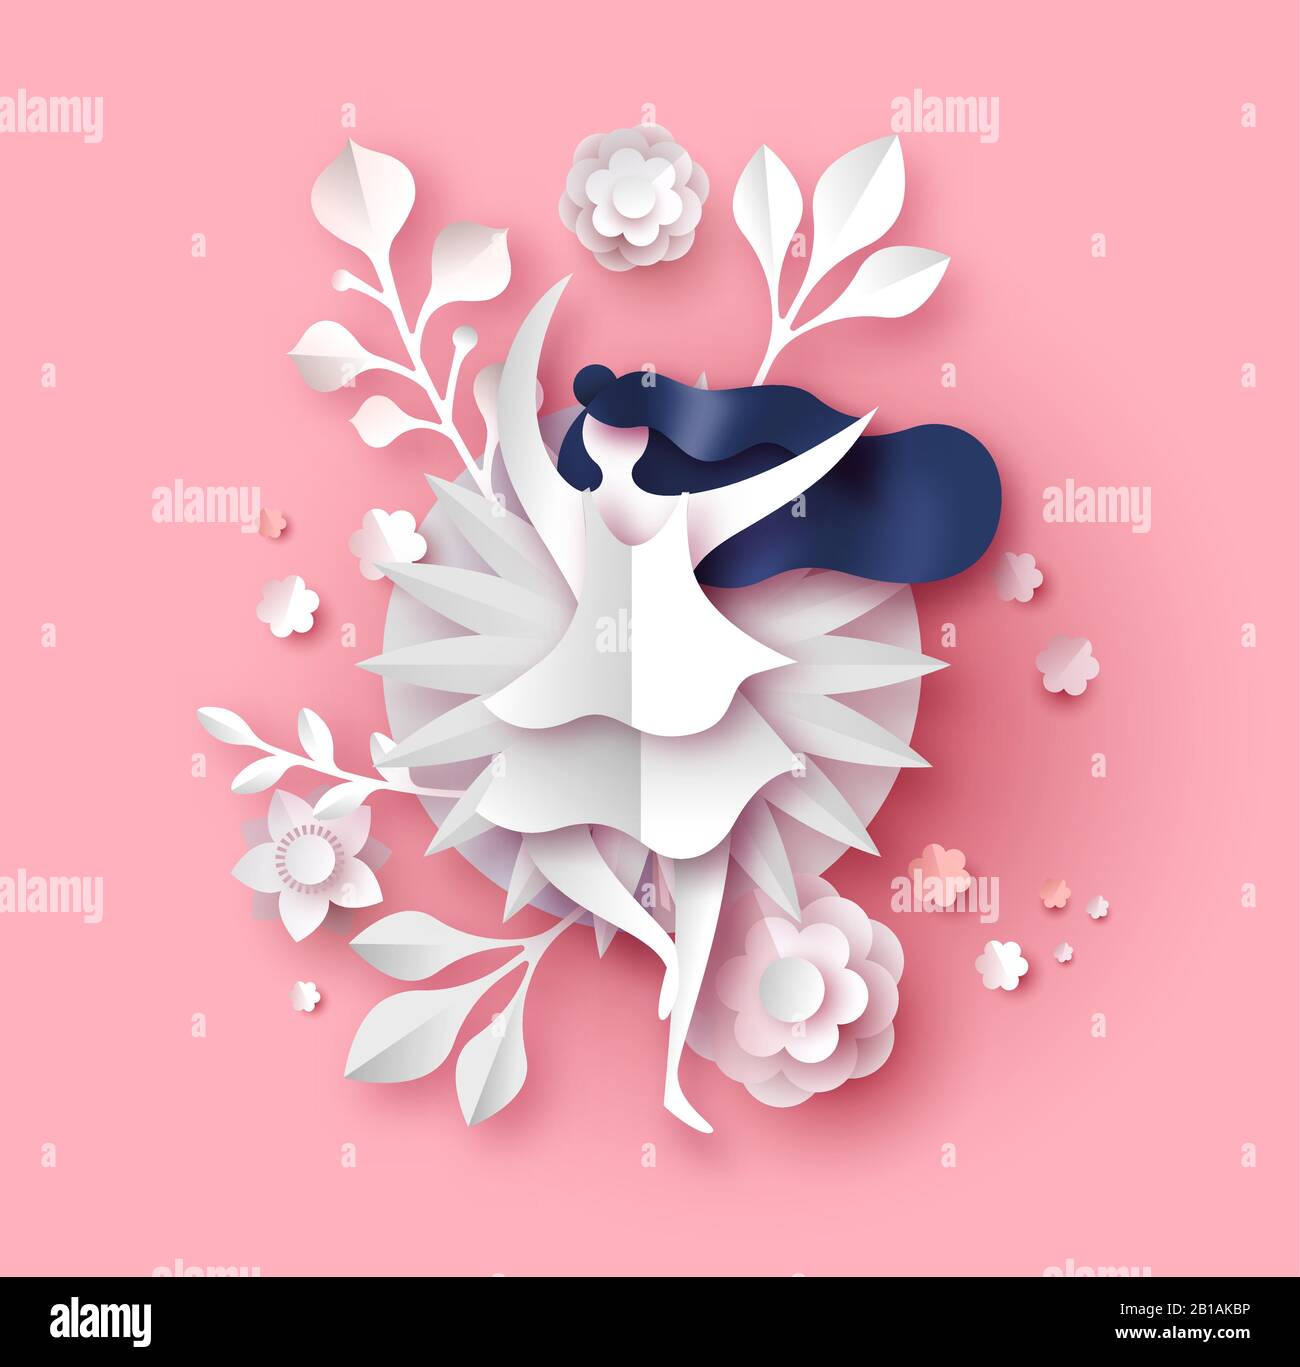 Papercut flower bouquet illustration with beautiful dancing woman on isolated pink background. Spring season 3d paper craft template includes nature p Stock Vector